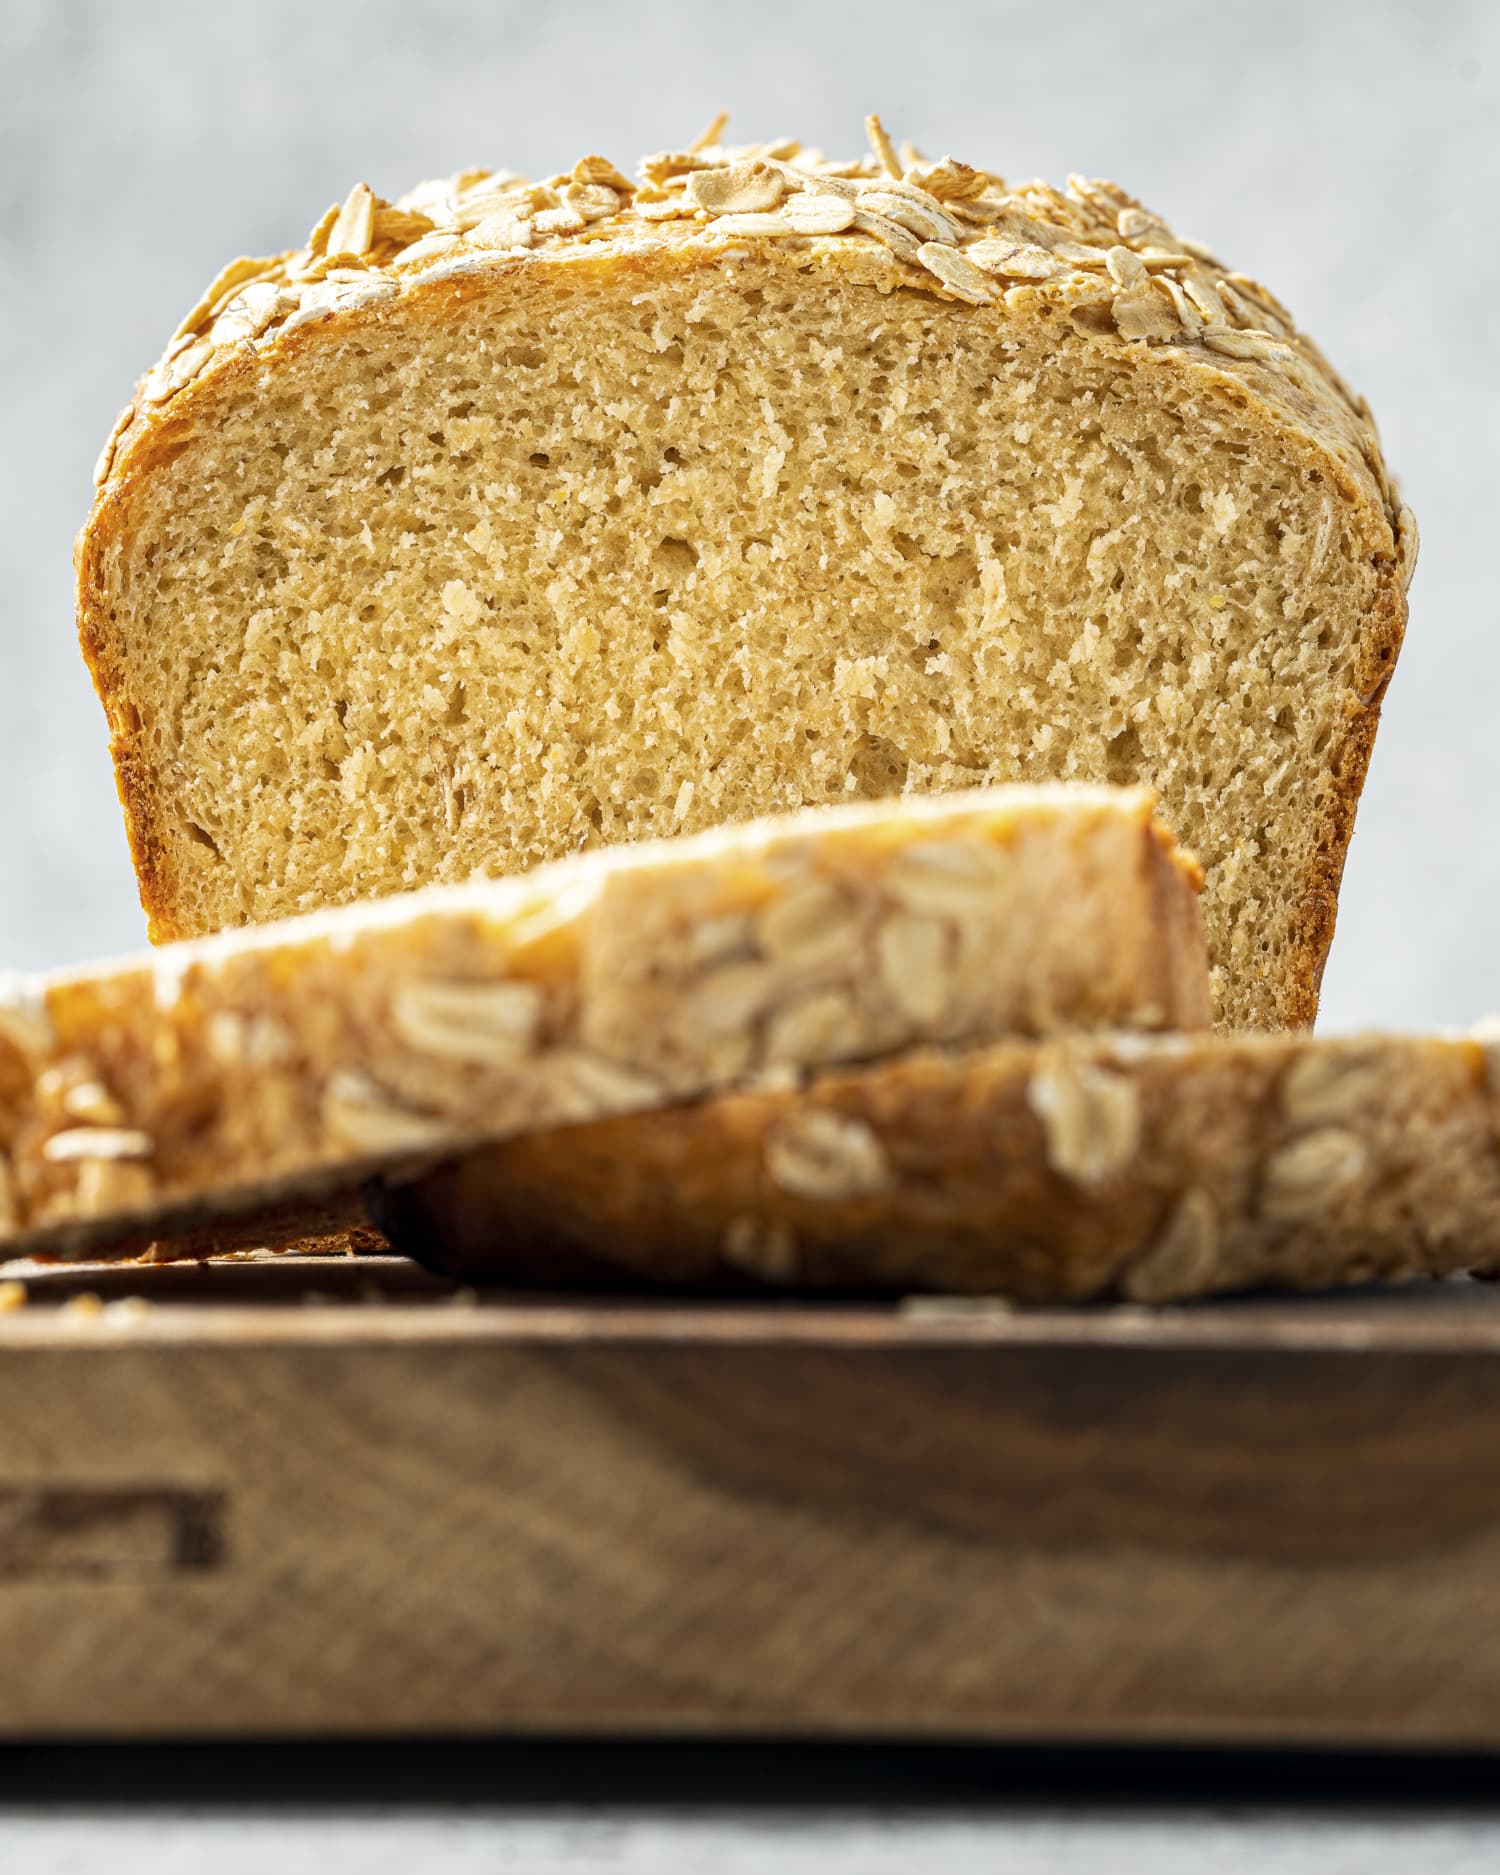 This Hearty Homemade Oatmeal Bread Will Become Your Go-To Sandwich Loaf